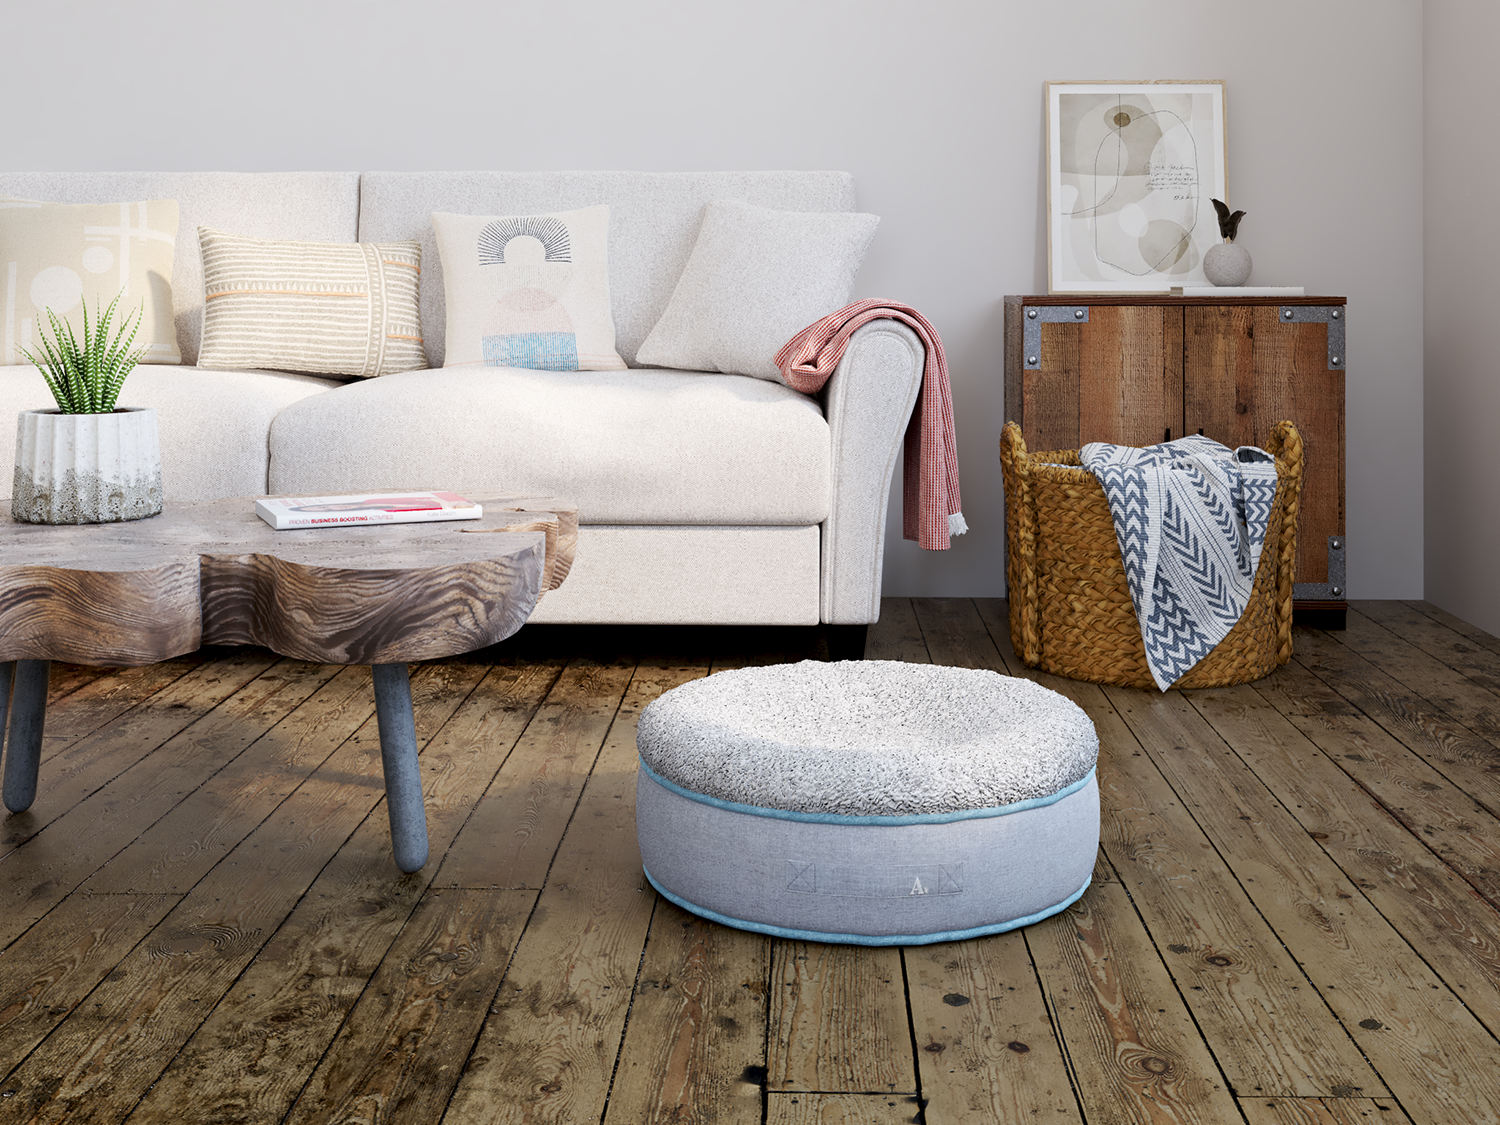 The Round Pet Bed